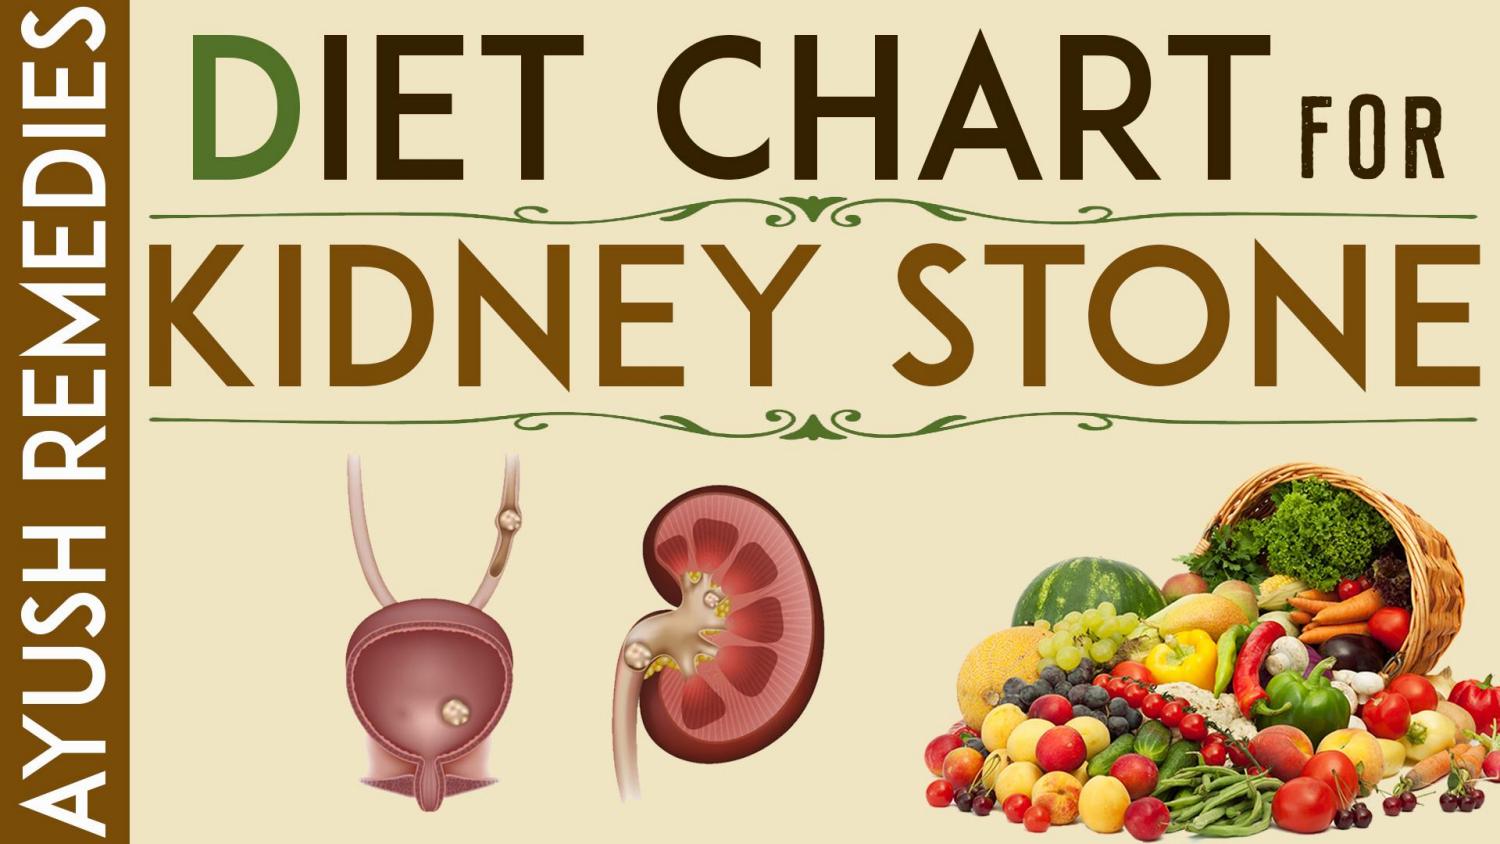 Kidney Stone Diet, List of Foods to Eat and Avoid During ...